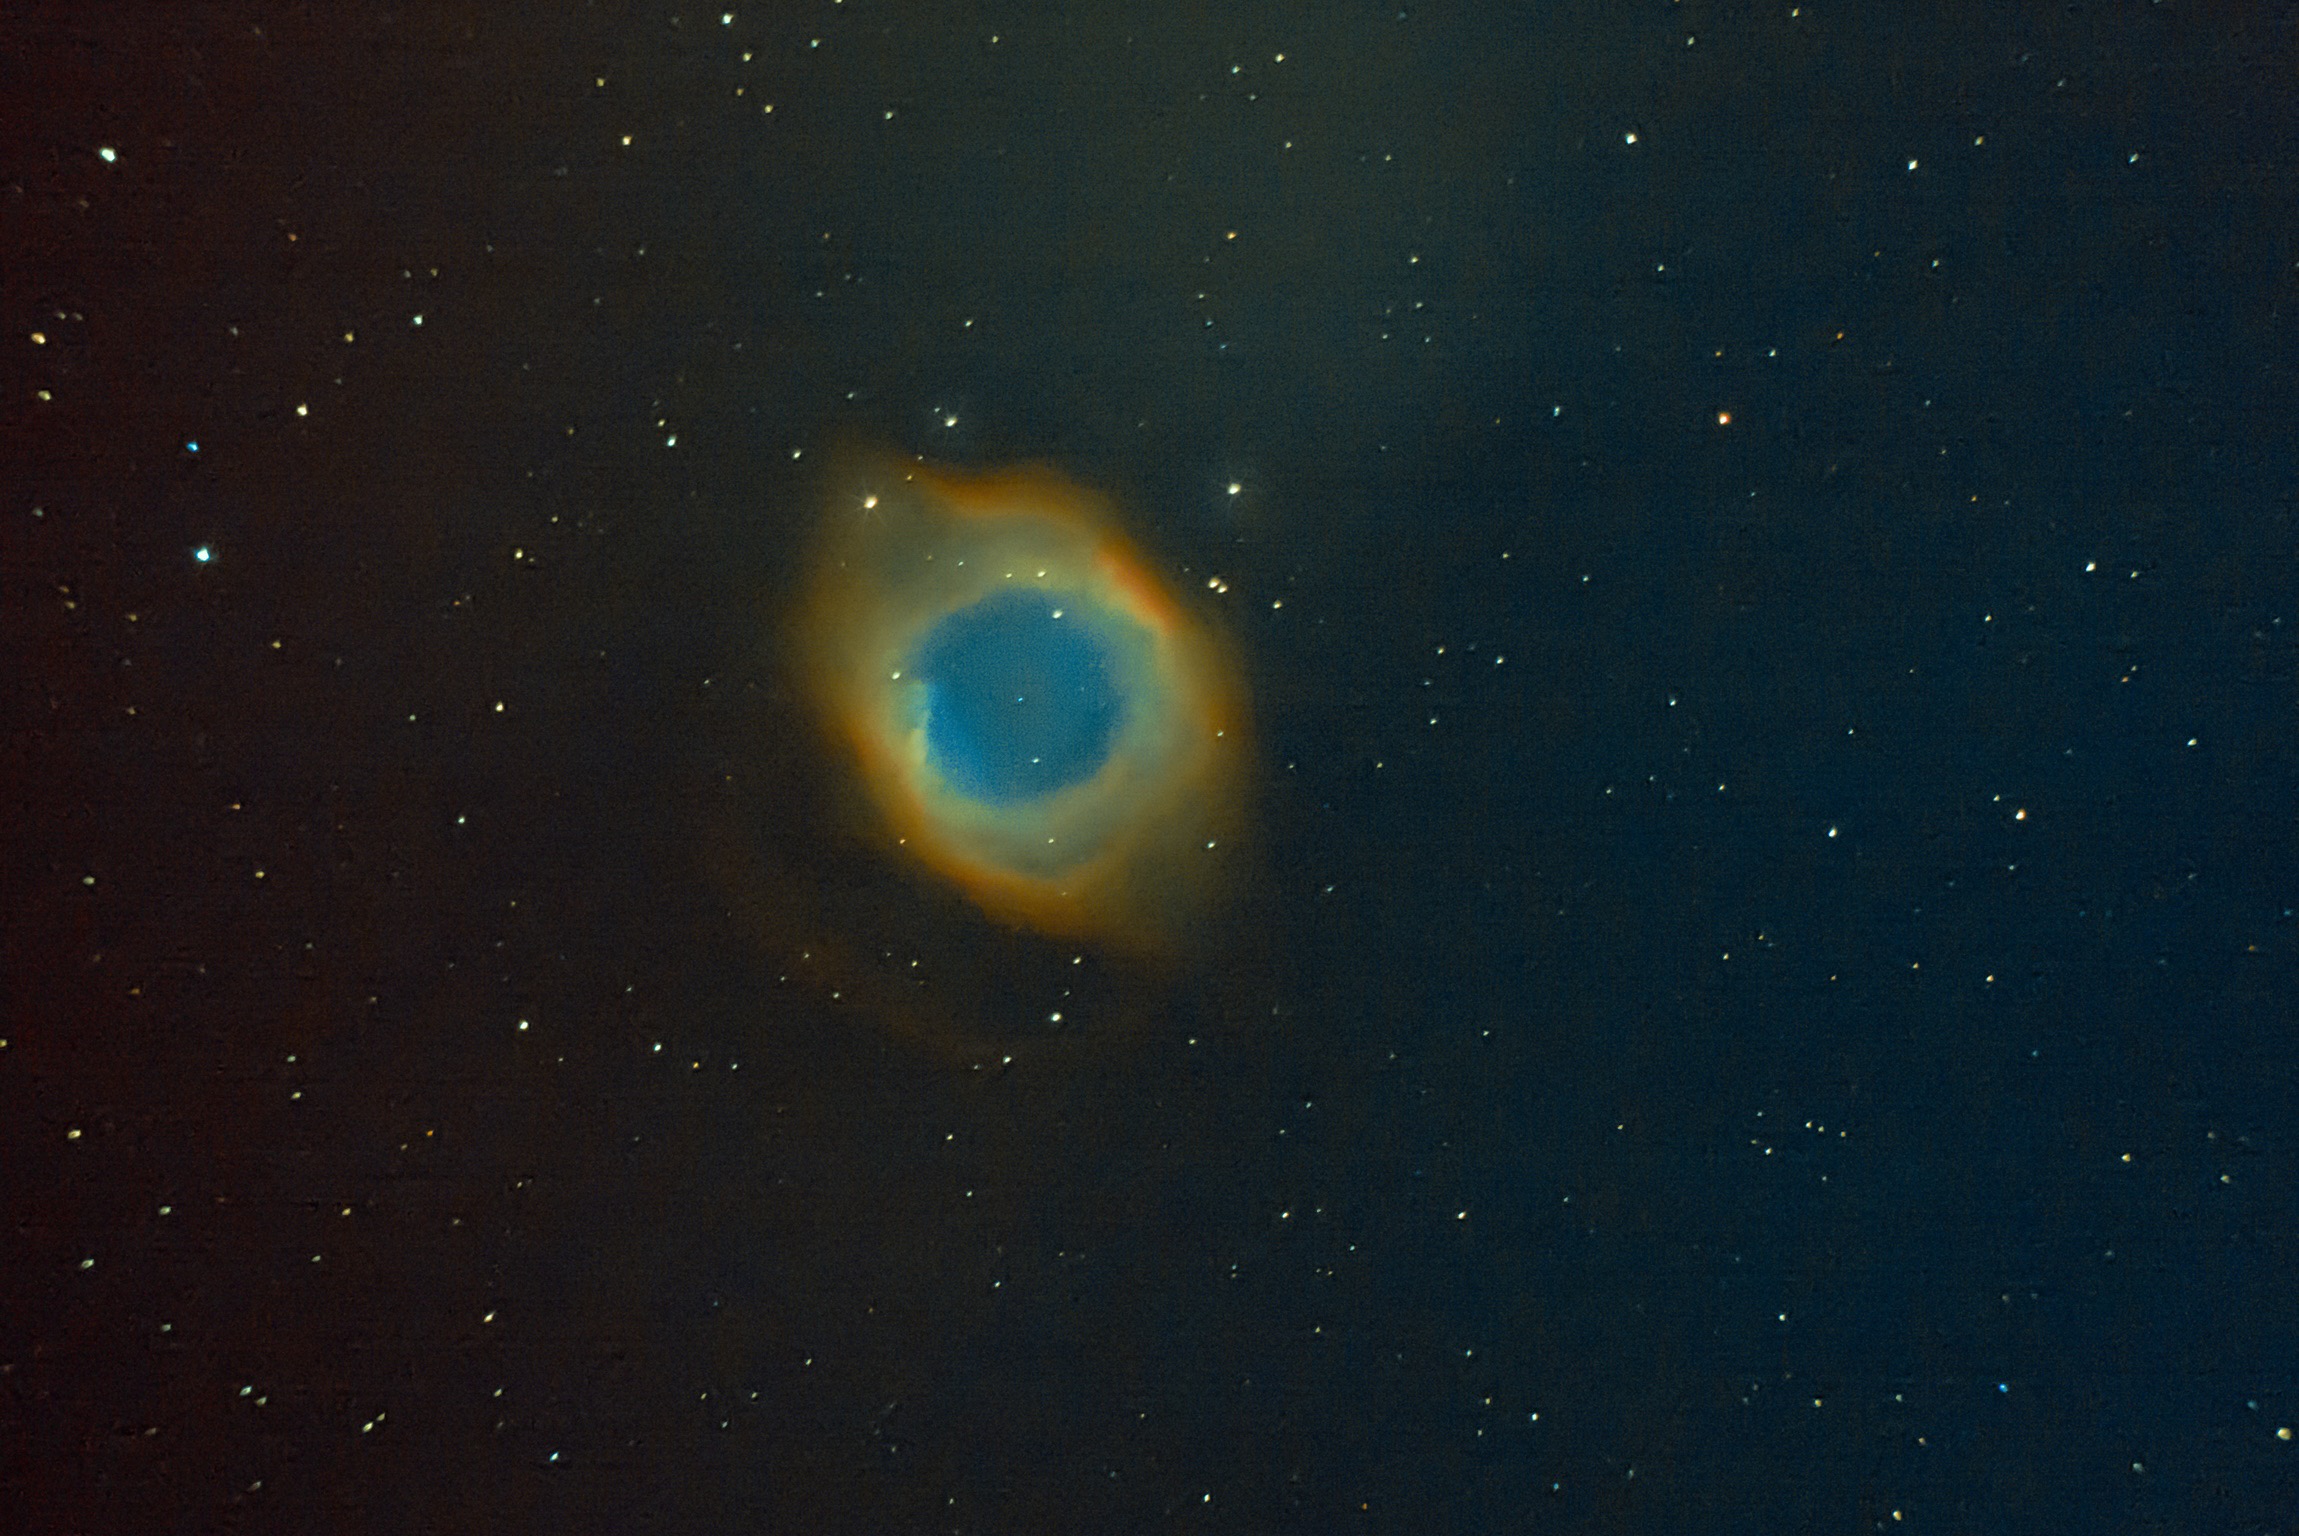 Helix Nebula,{ future of our Sun},about 700 light years away.This Nebula sheds outer layers near the end of its evolution.This is also fate of our Sun after 10 billion years.